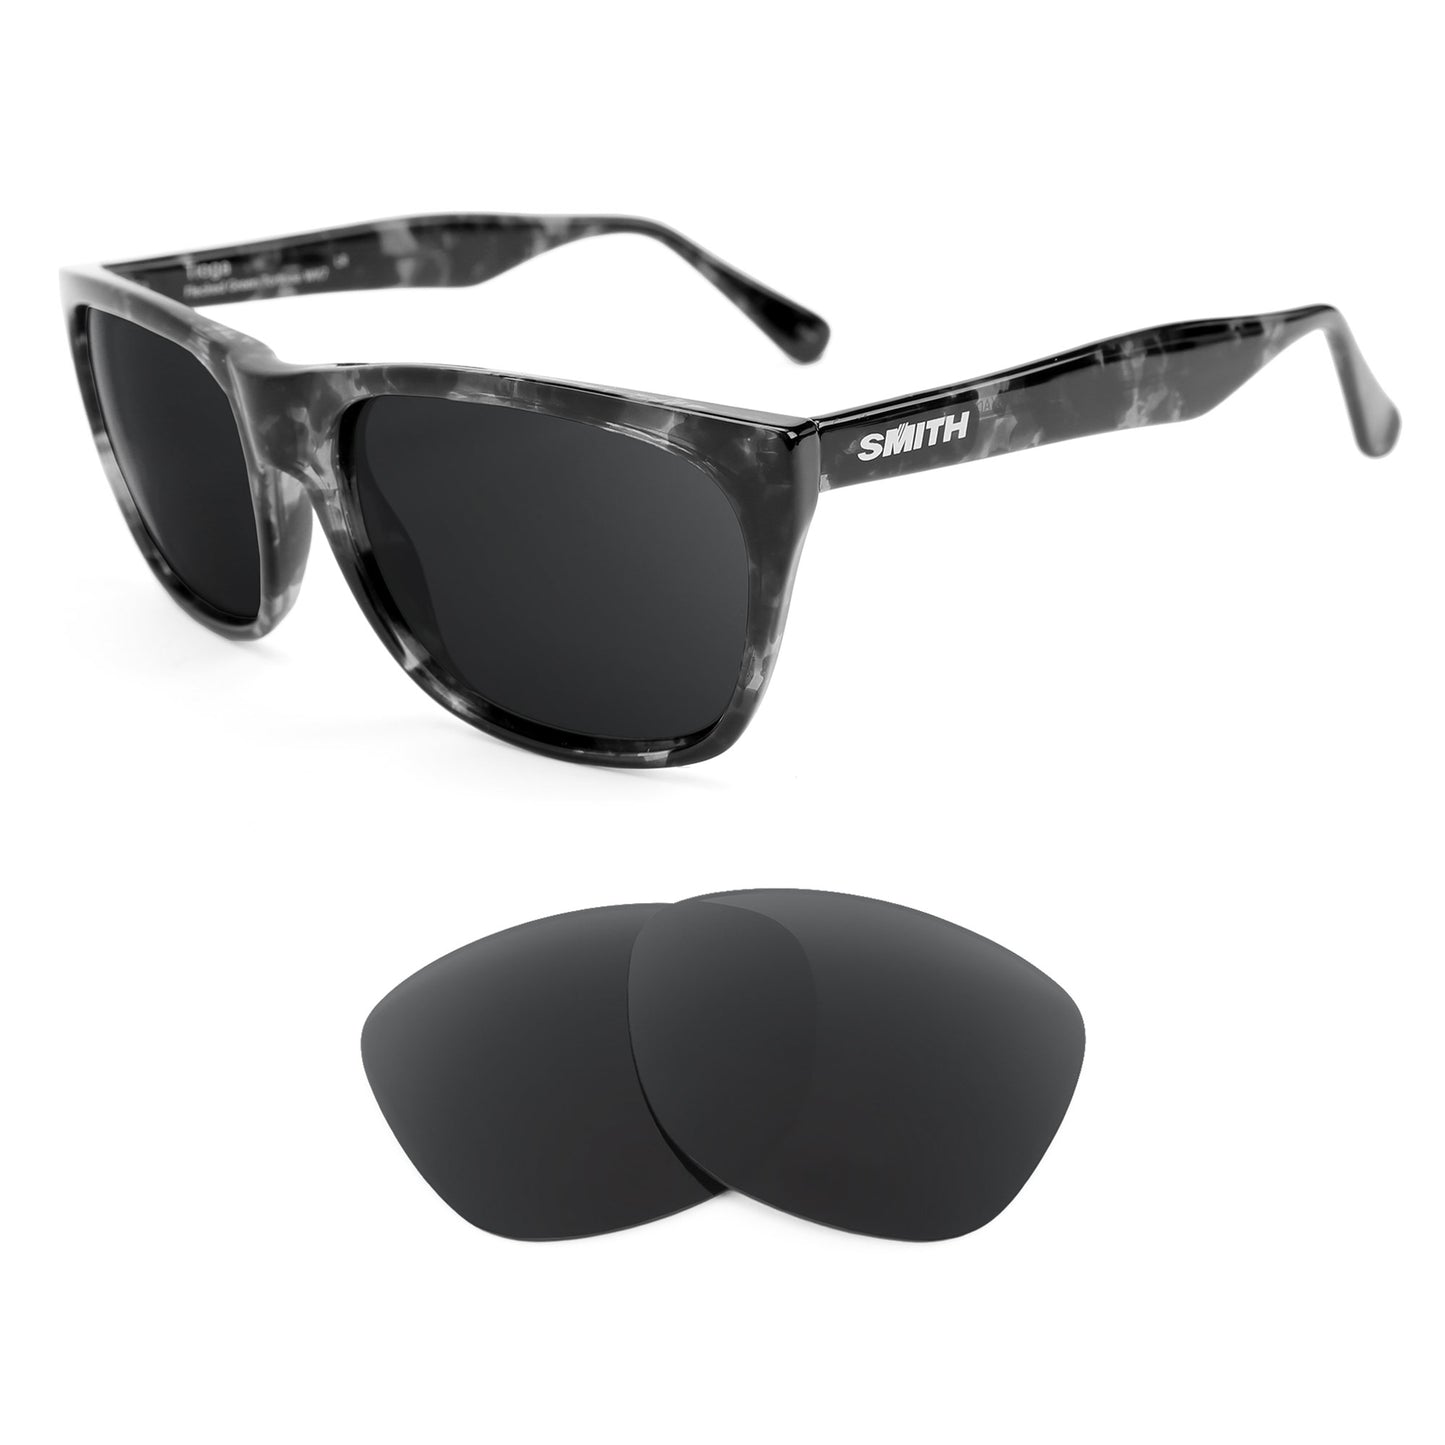 Smith Tioga sunglasses with replacement lenses